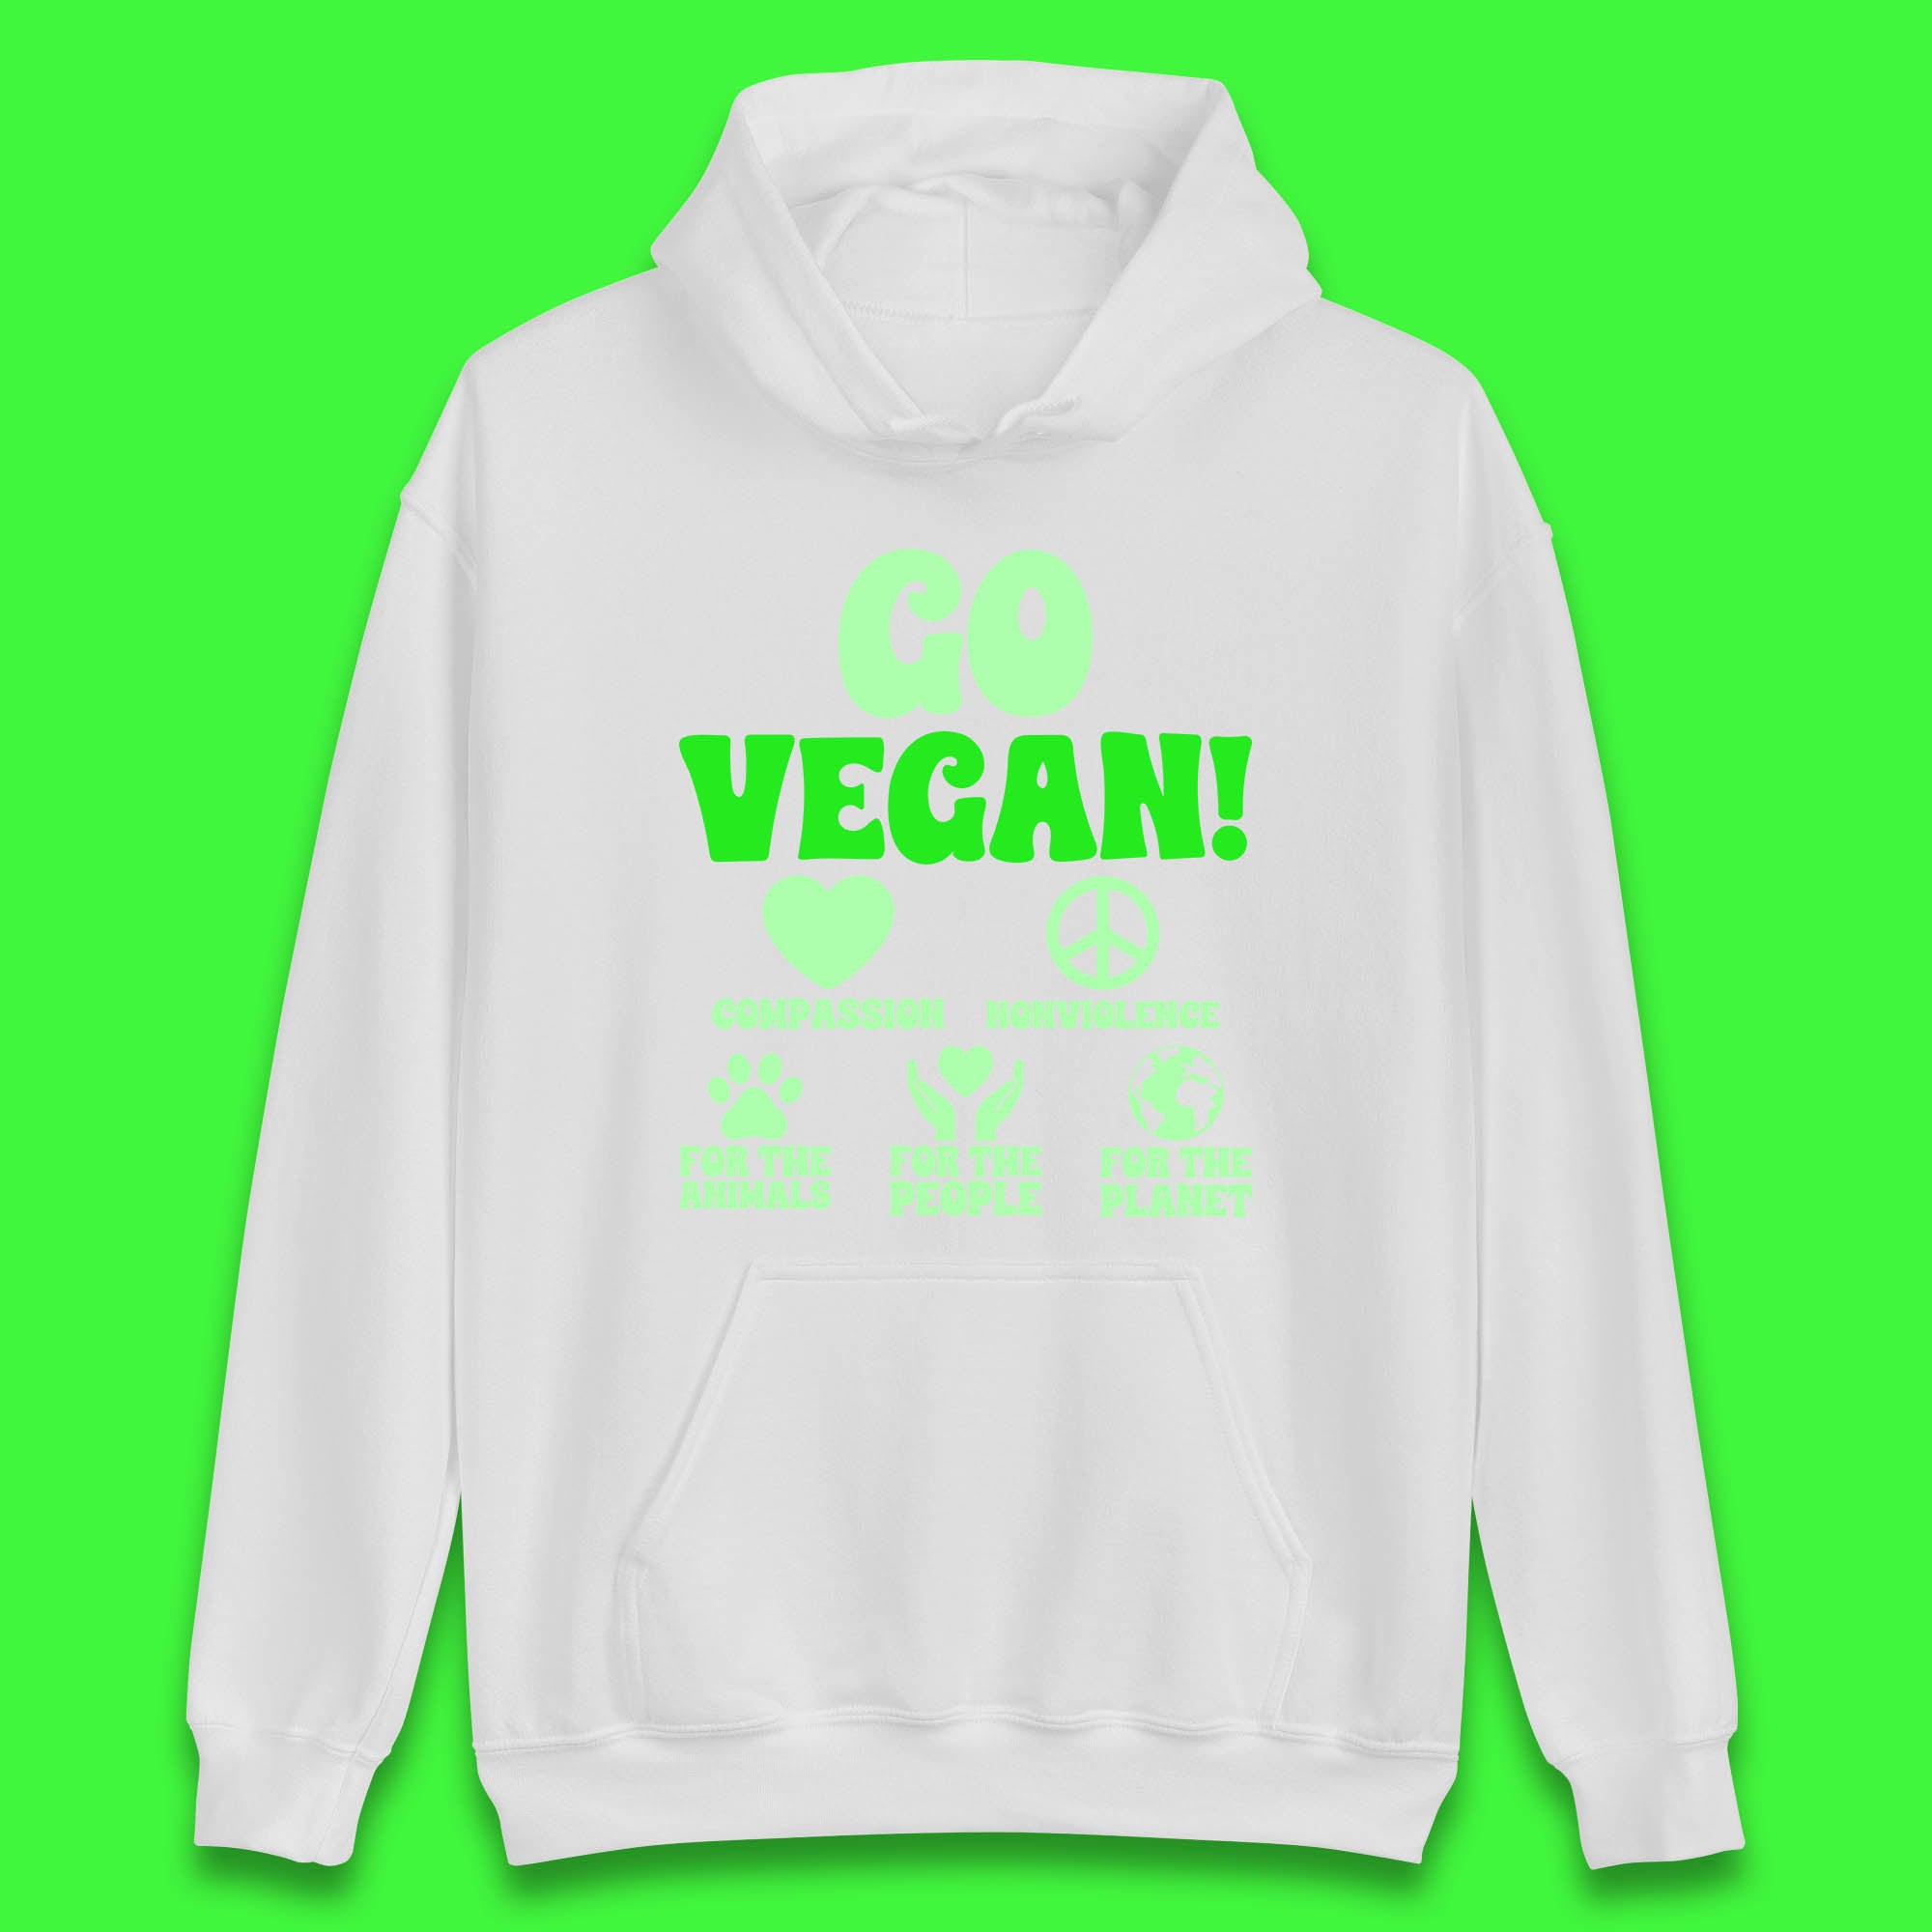 Go Vegan Compassion Nonviolence For The Animals For The People For The Planet Unisex Hoodie